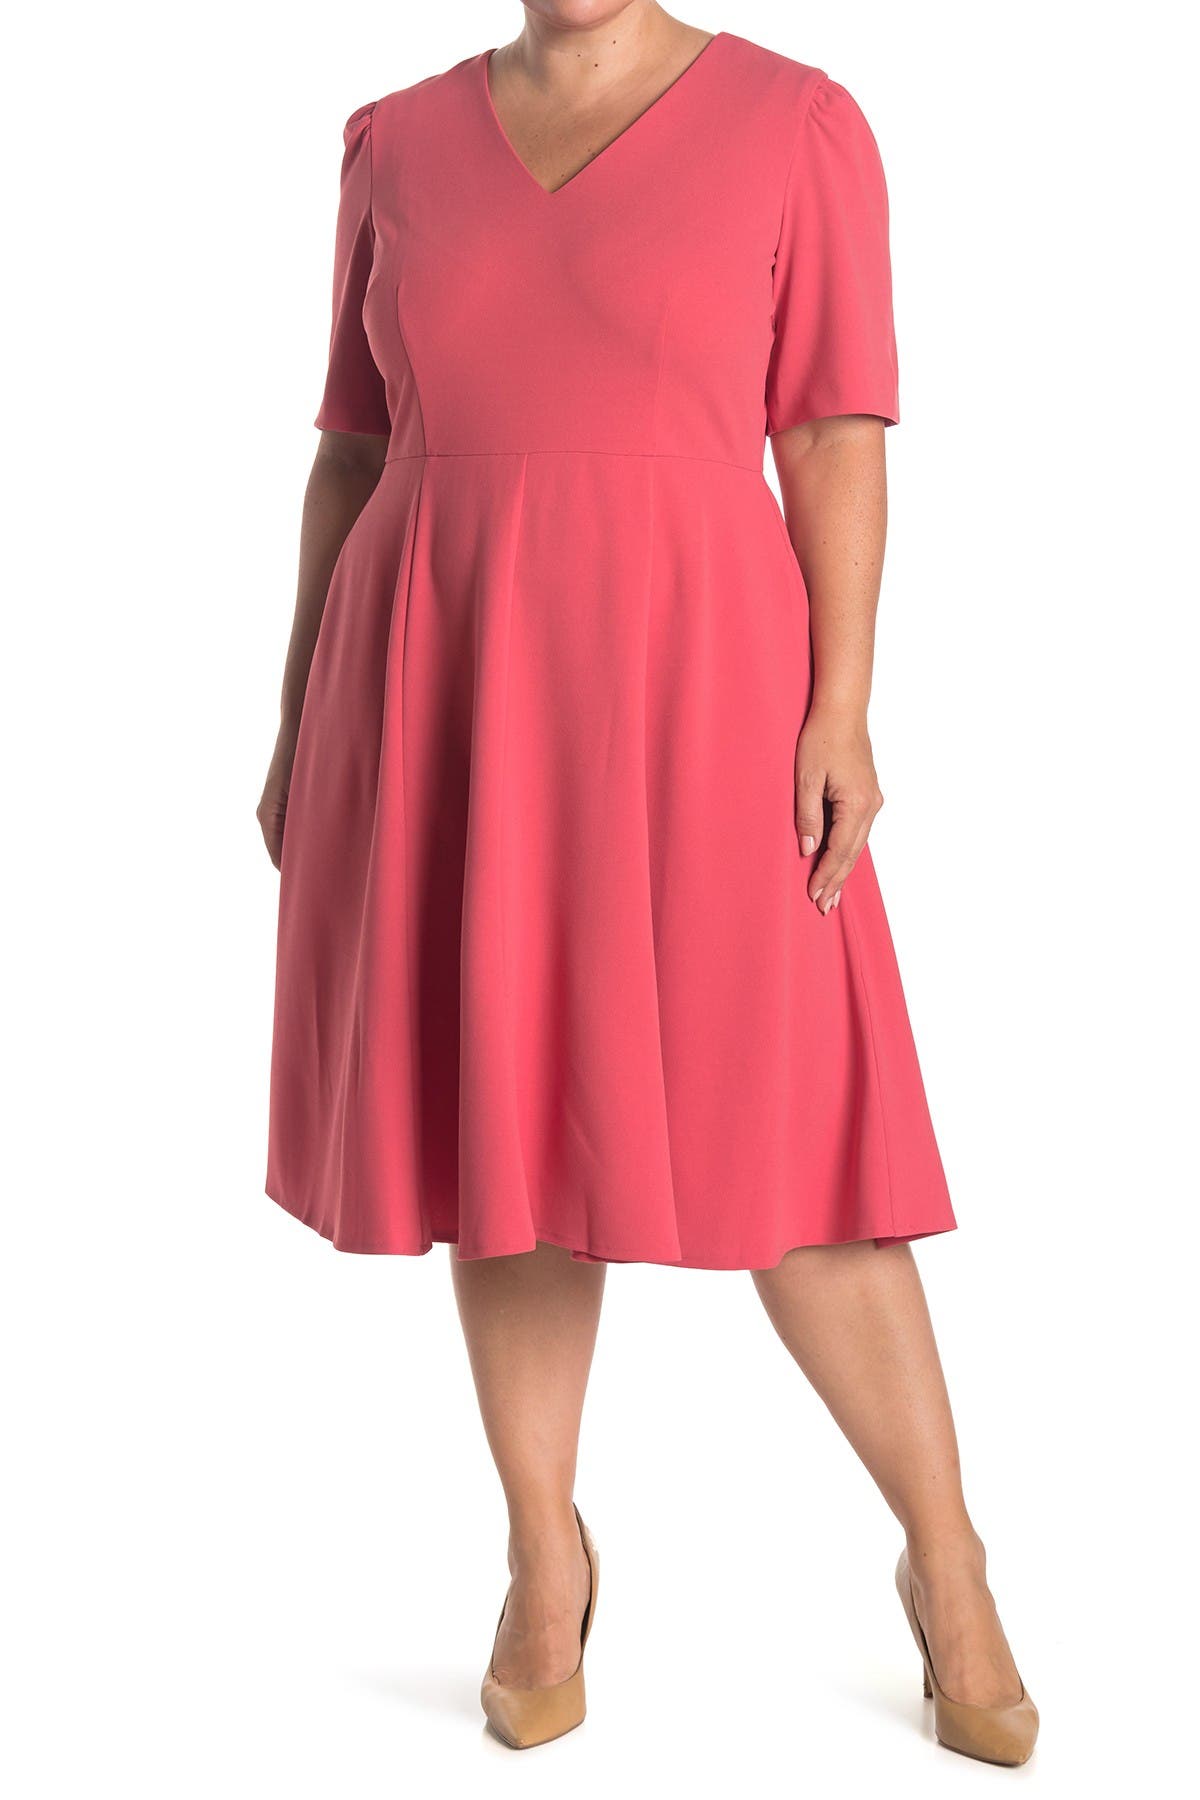 donna morgan fit and flare dress